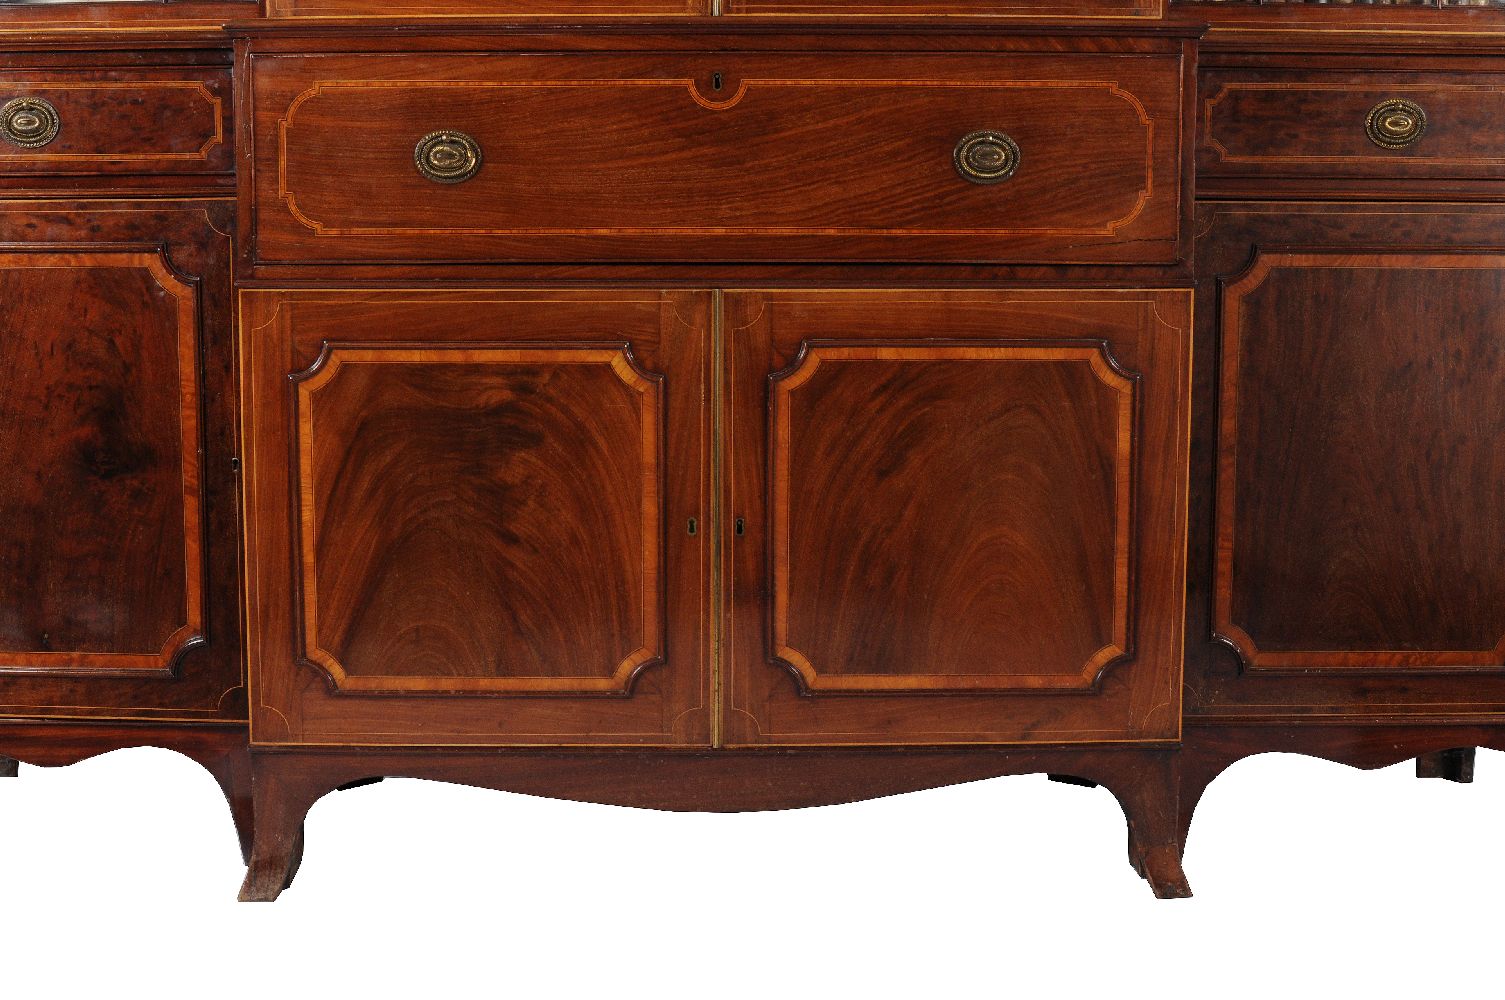 A George III 'plum pudding' mahogany and satinwood banded breakfront secretaire library bookcase - Image 3 of 5